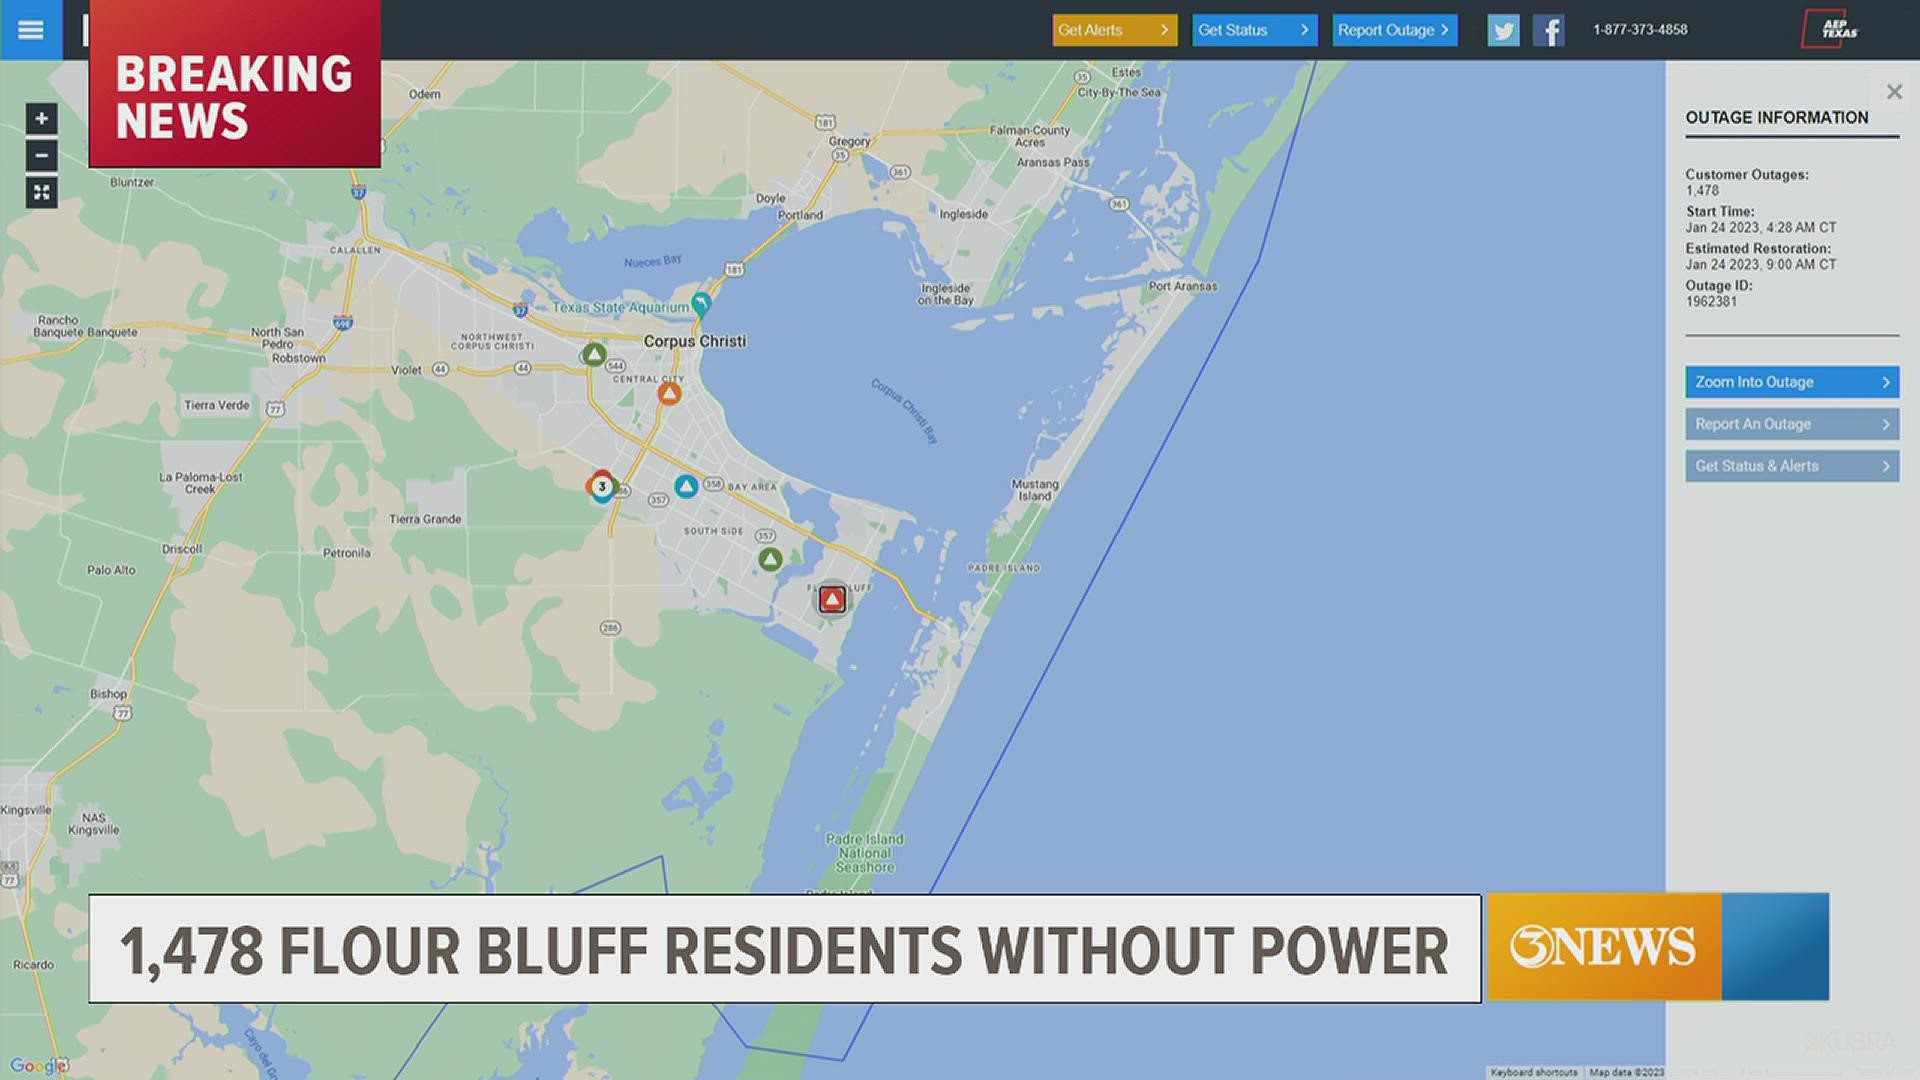 More than 1,400 Flour Bluff AEP customers are without power Tuesday morning. The cause is unknown.